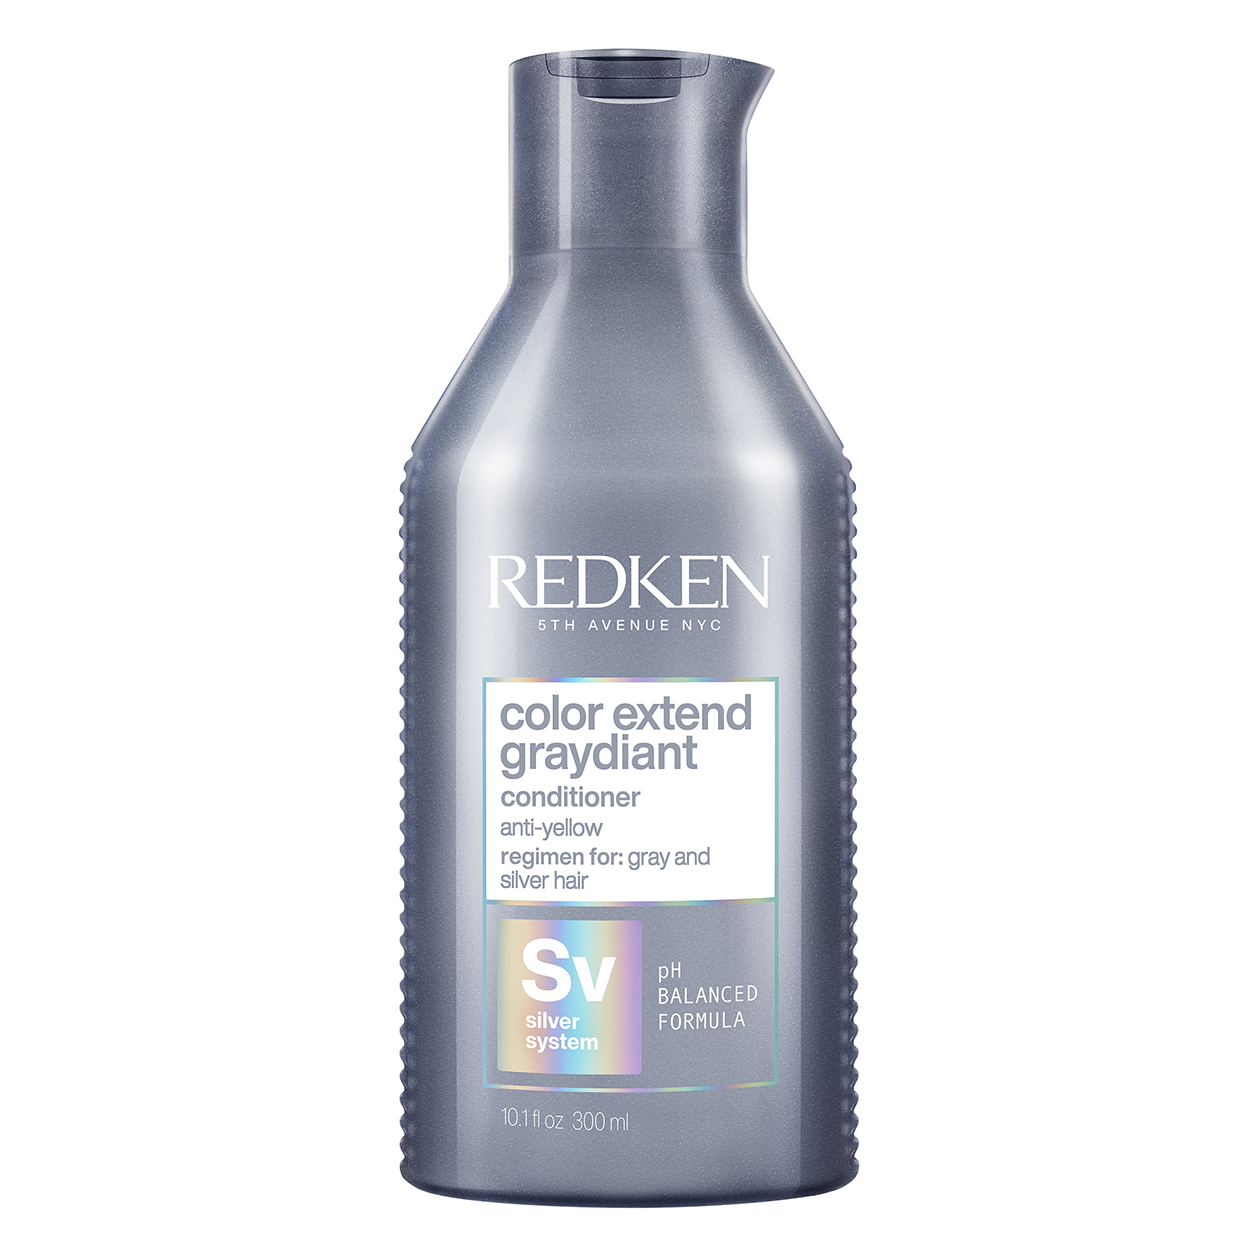 Redken Color Extend Graydiant Conditioner | Hair Toner For Gray & Silver Hair | Removes & Tones Brass | With Amino Acids Conditioner 33.8 Fl Oz (Pack of 1)